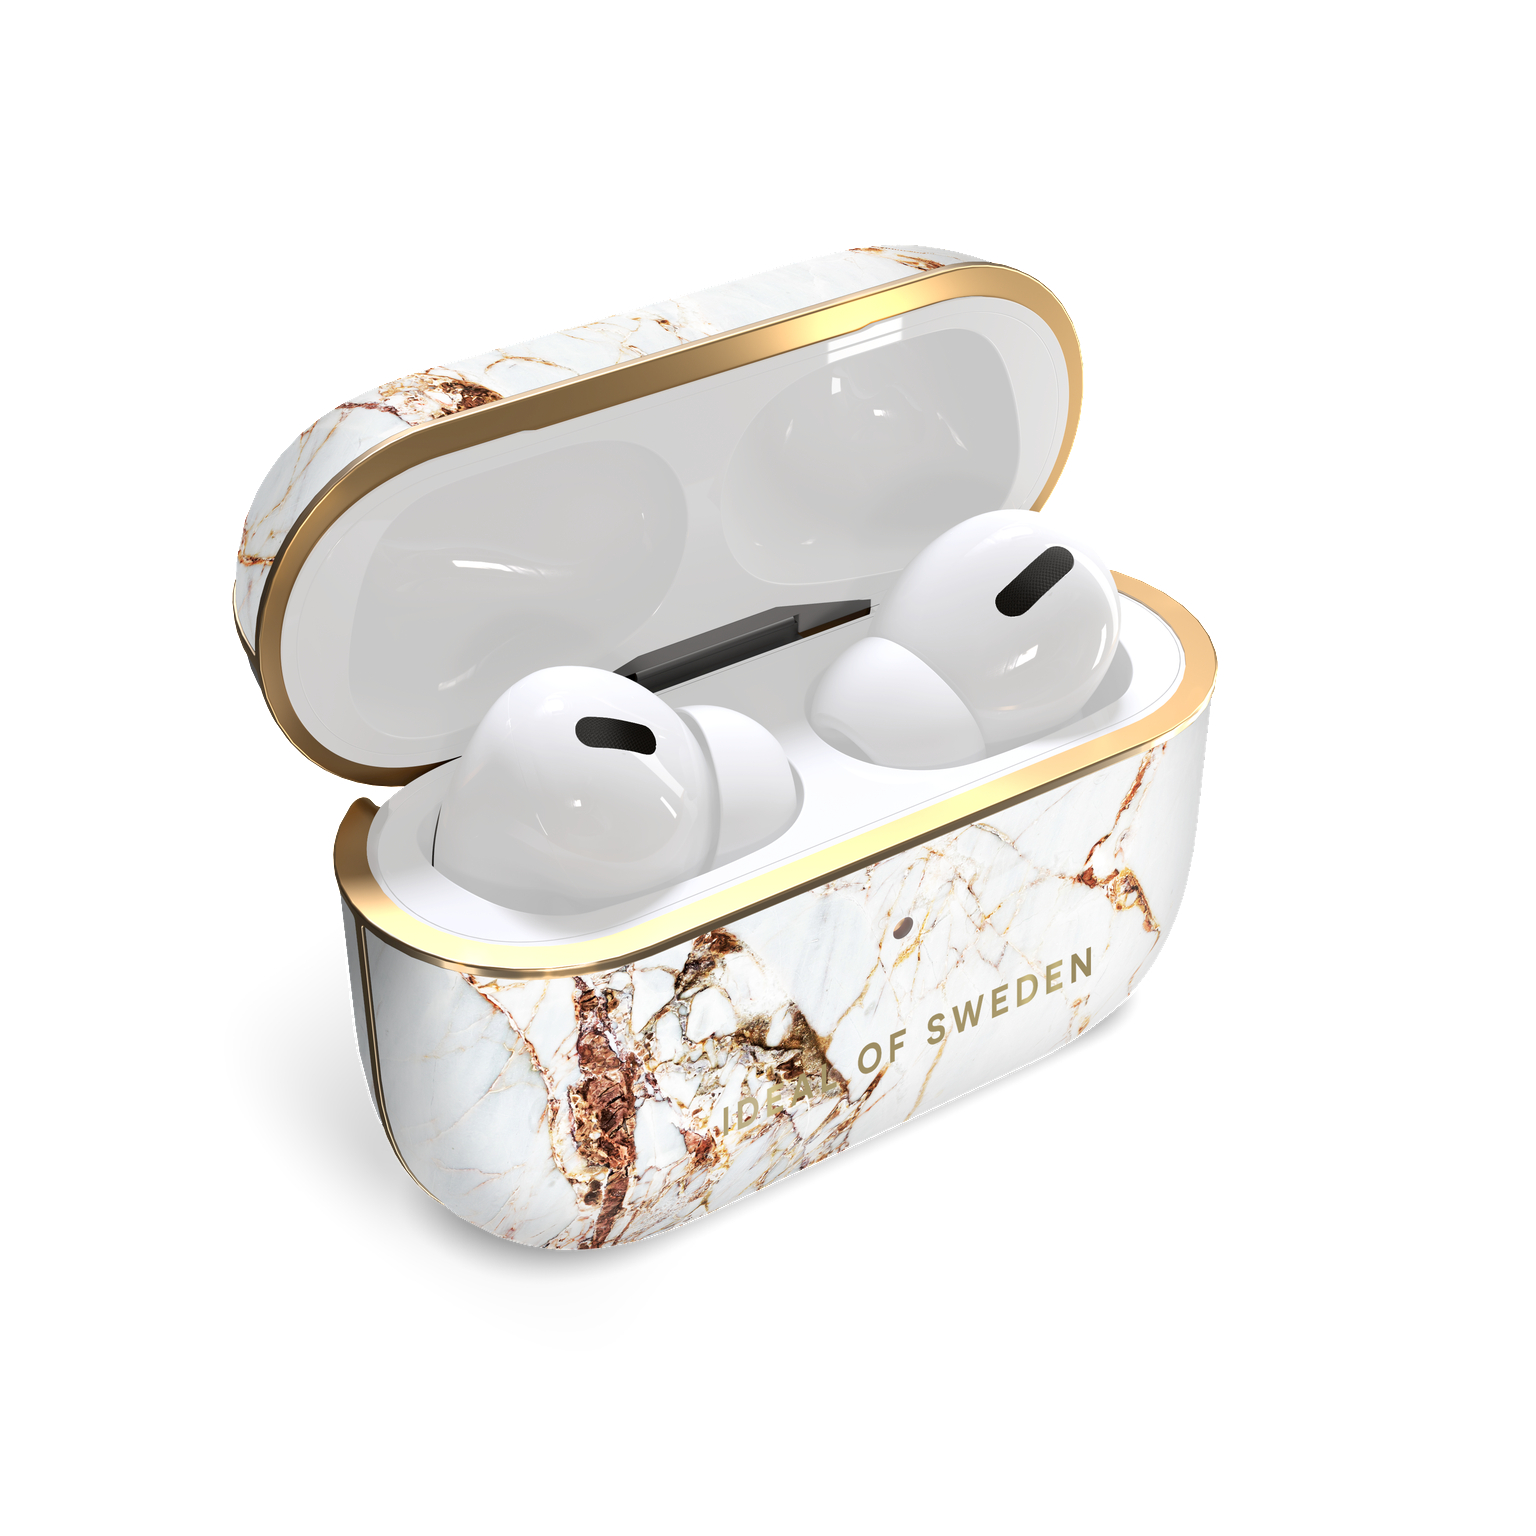 SWEDEN IDFAPC-PRO-46 IDEAL AirPod Case OF